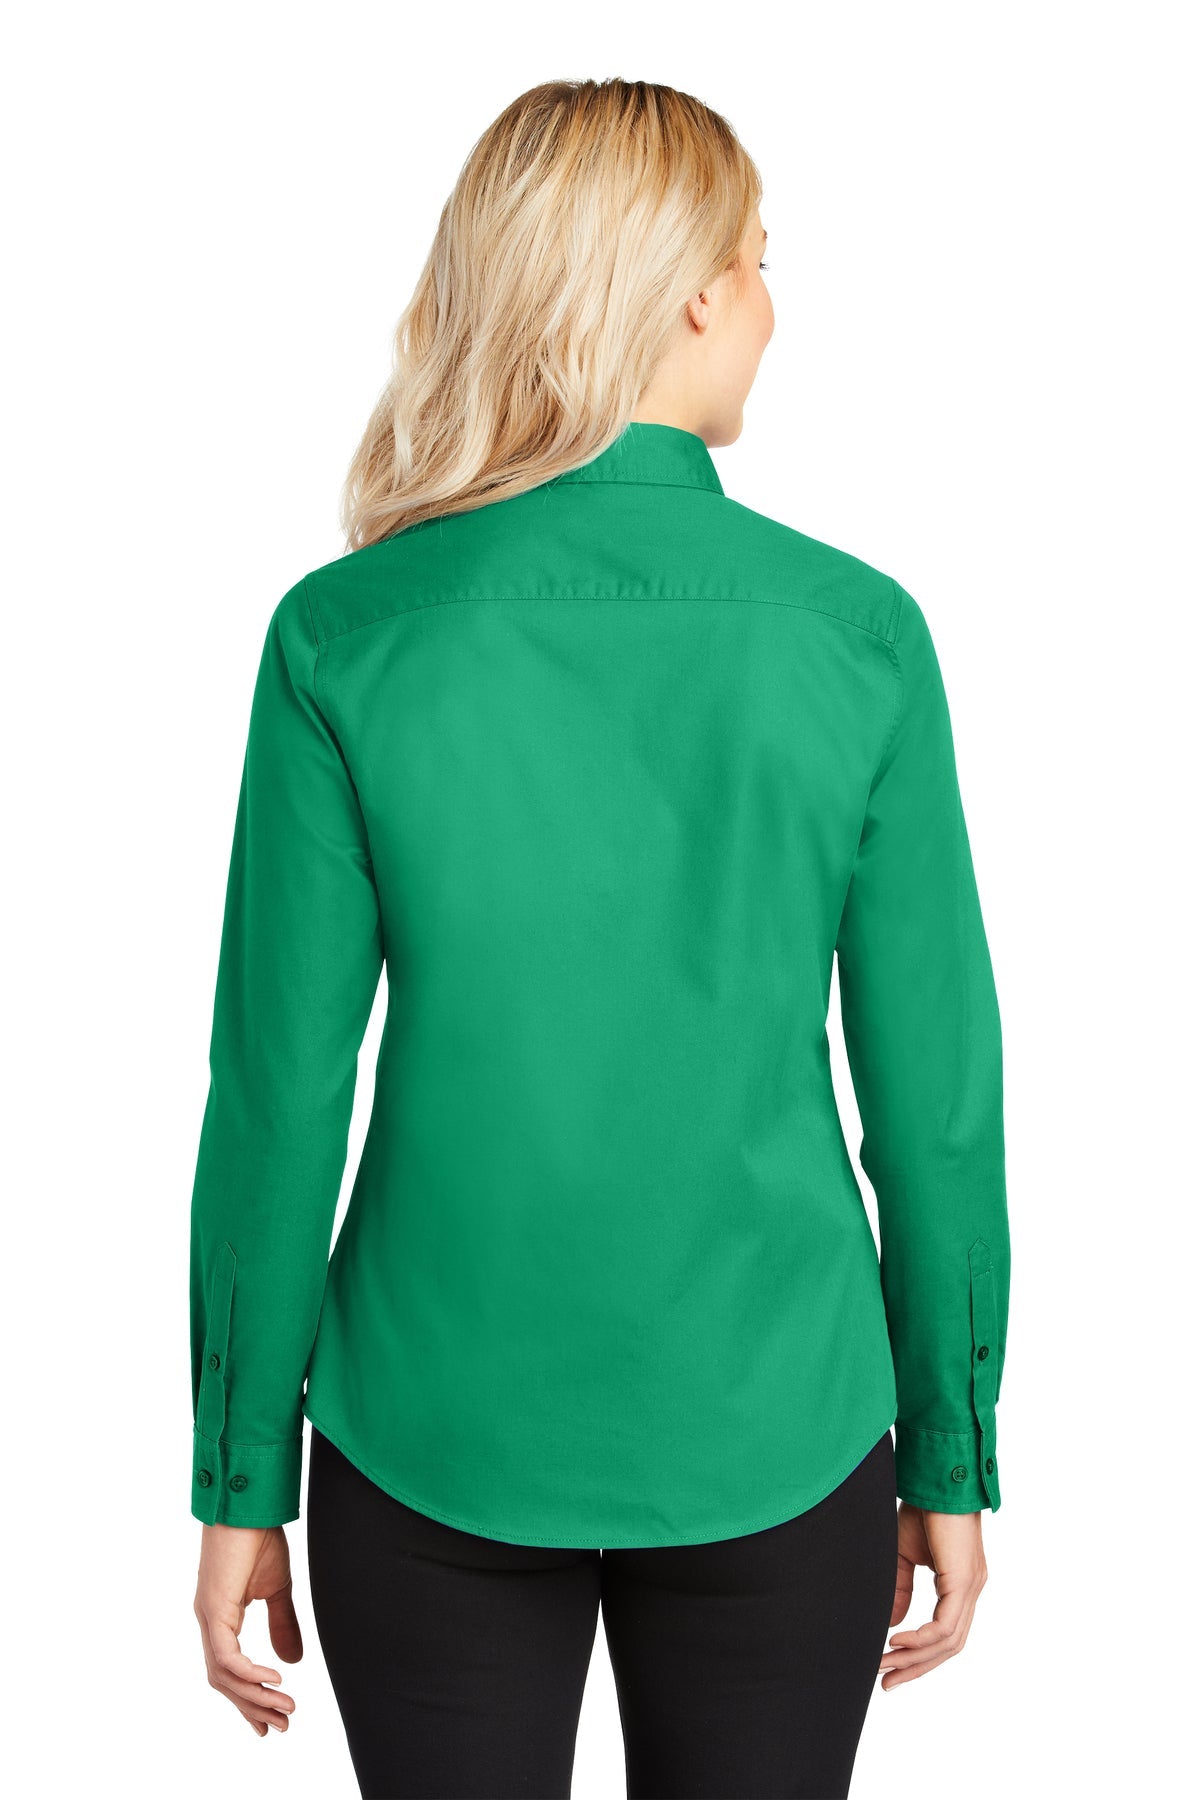 port authority_l608 _court green_company_logo_button downs